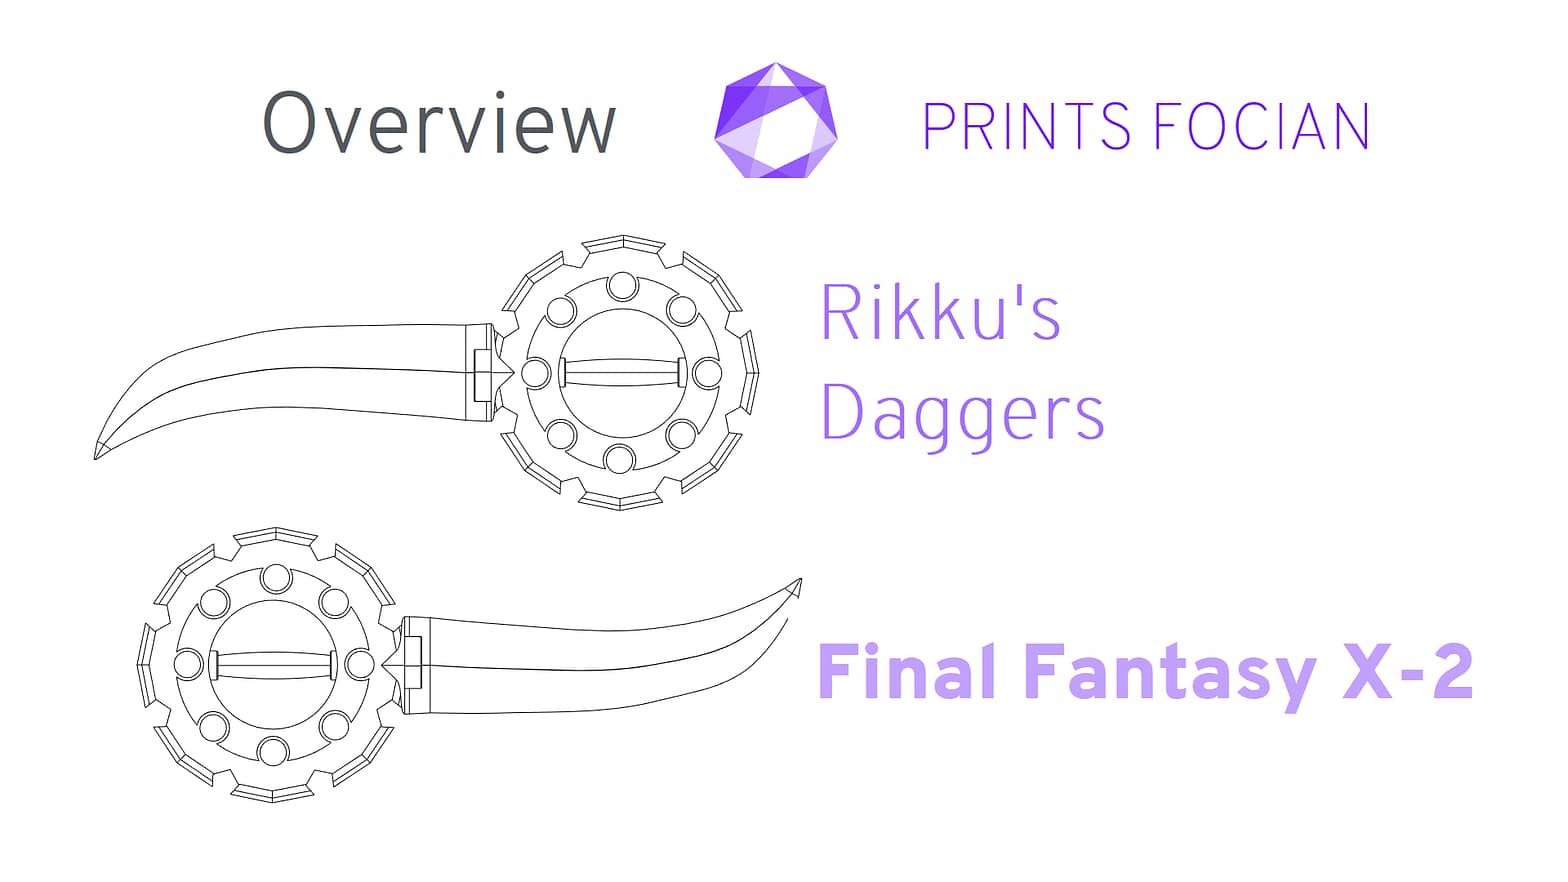 Wireframe image of Rikku's Daggers on a white background. Prints Focian Icon top and central. Text: Purple Prints Focian, Rikku's Daggers, Final Fantasy X-2 and dark grey Overview.